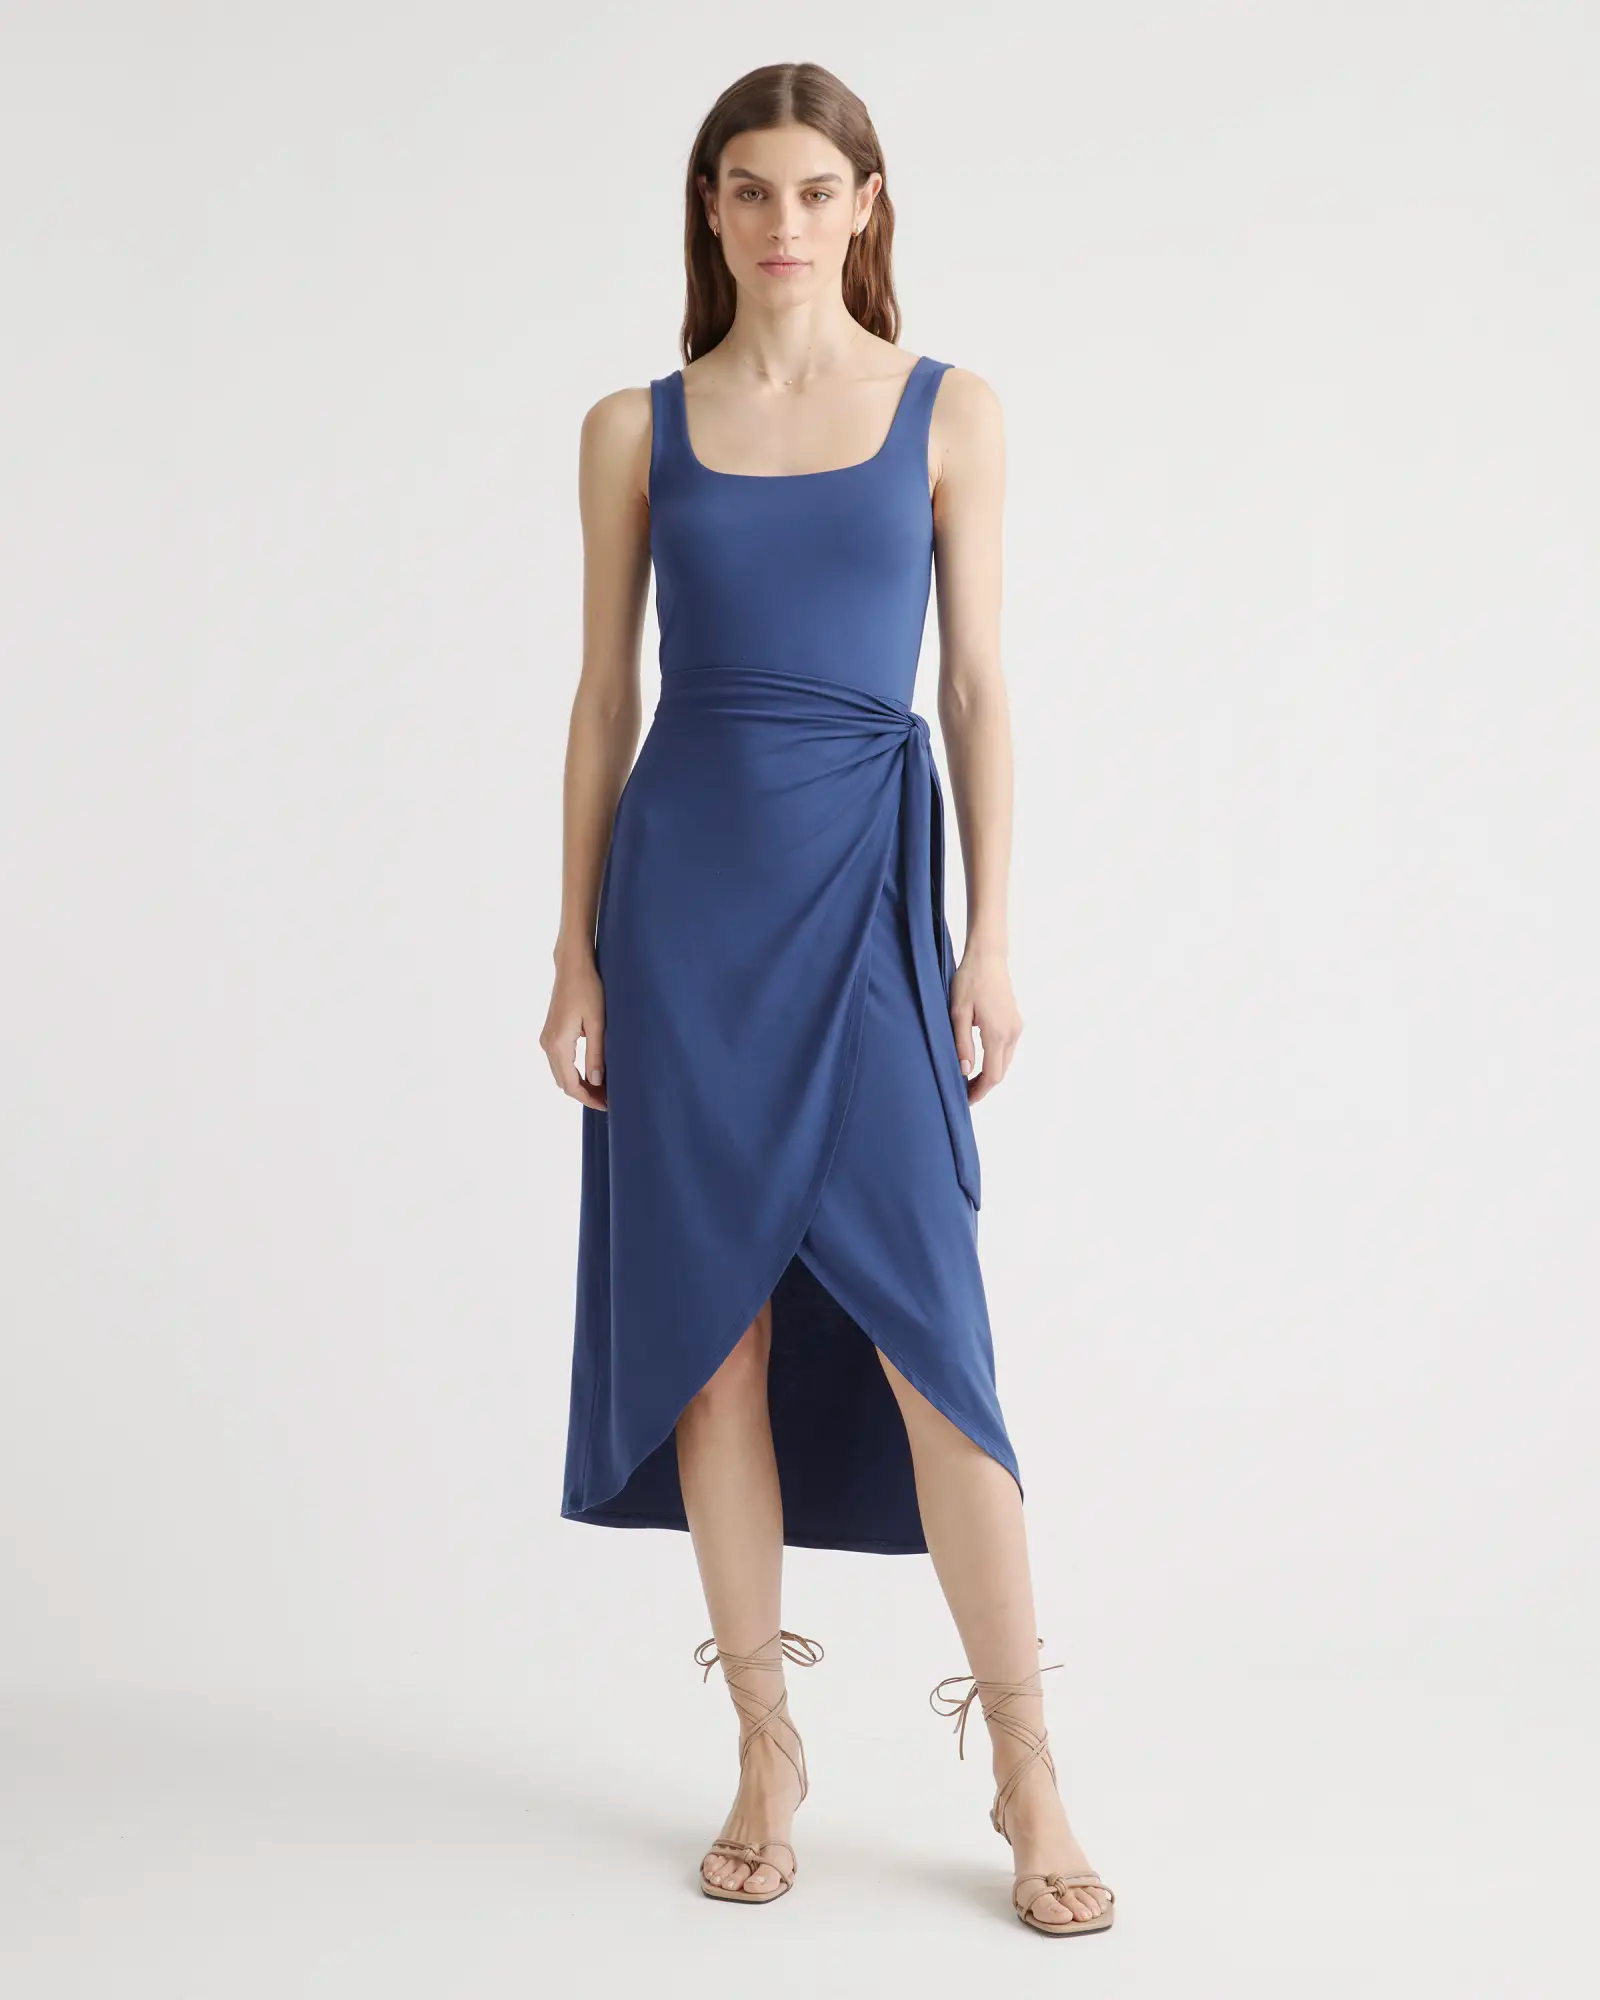 Affordable High-Quality Basics: Quince Summer Clothes Review - Styled by  Science